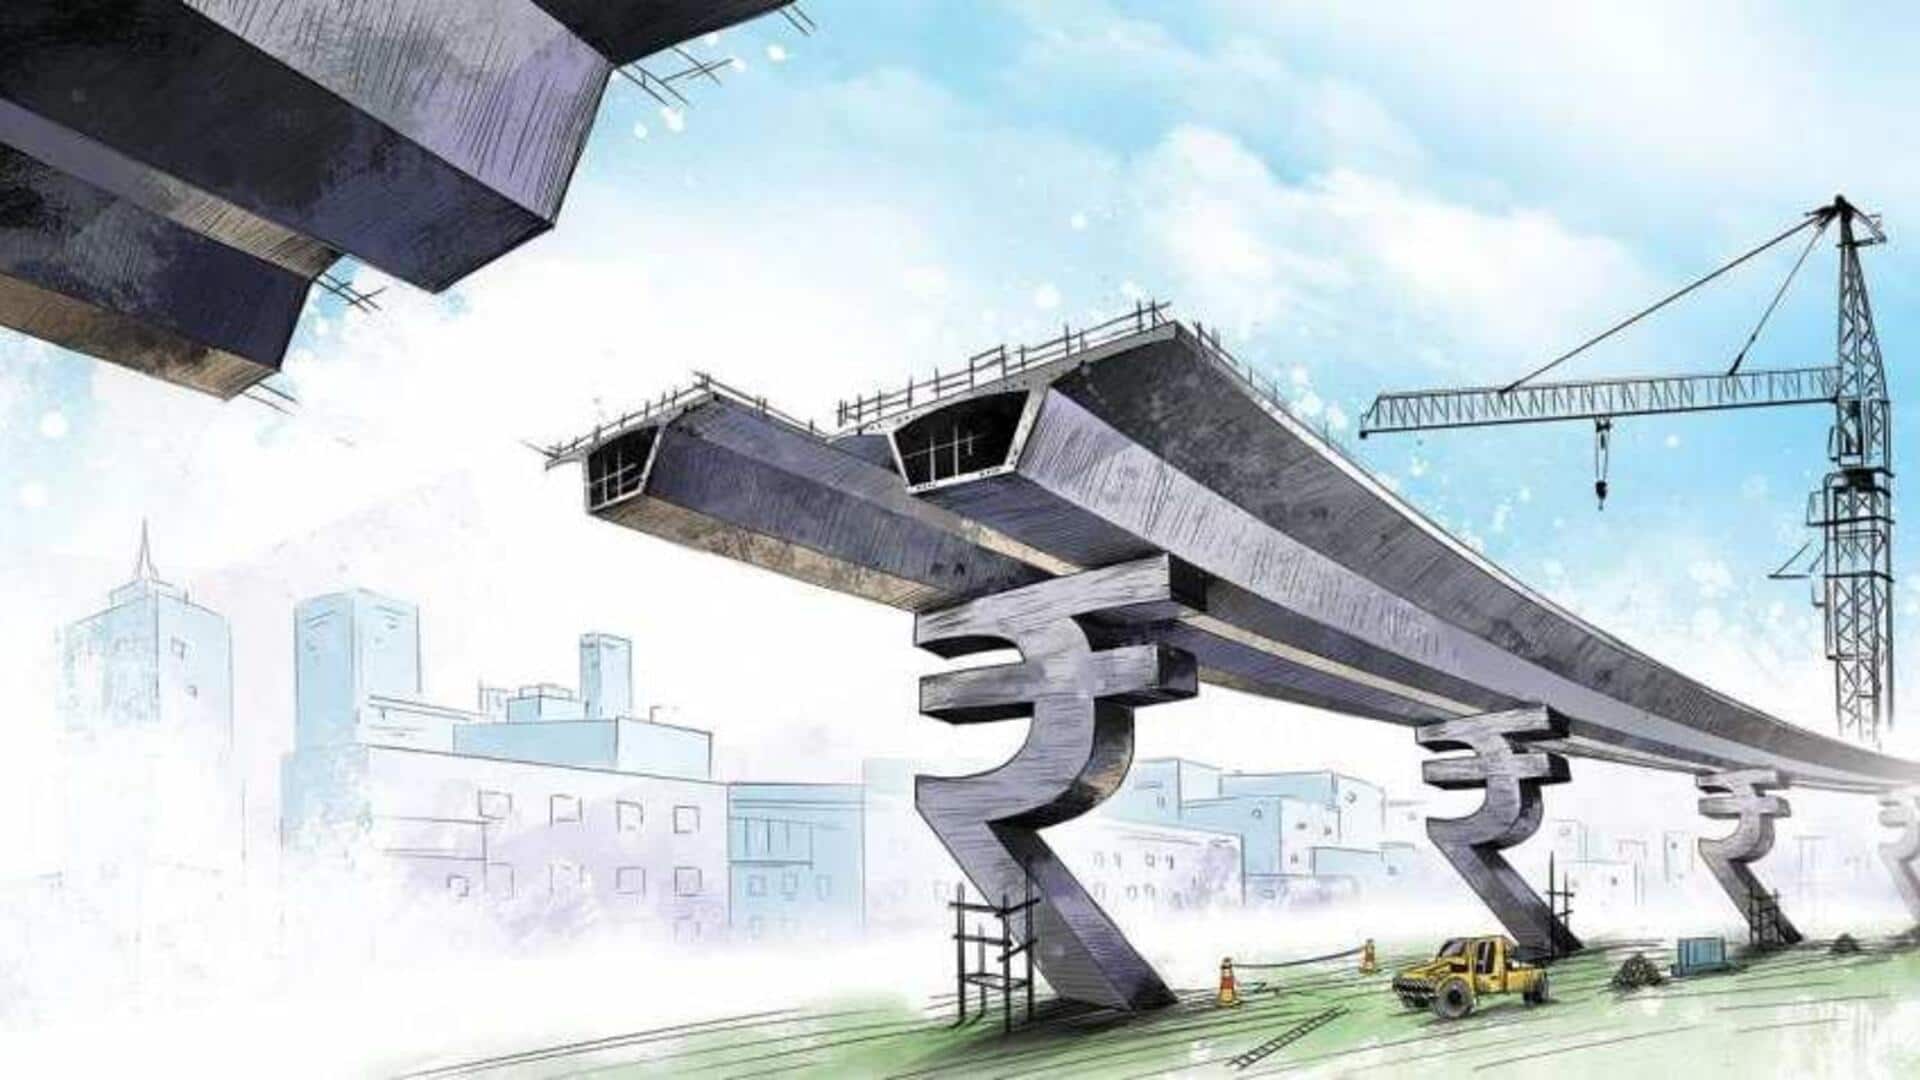 Over 450 infrastructure projects in India face massive cost overrun